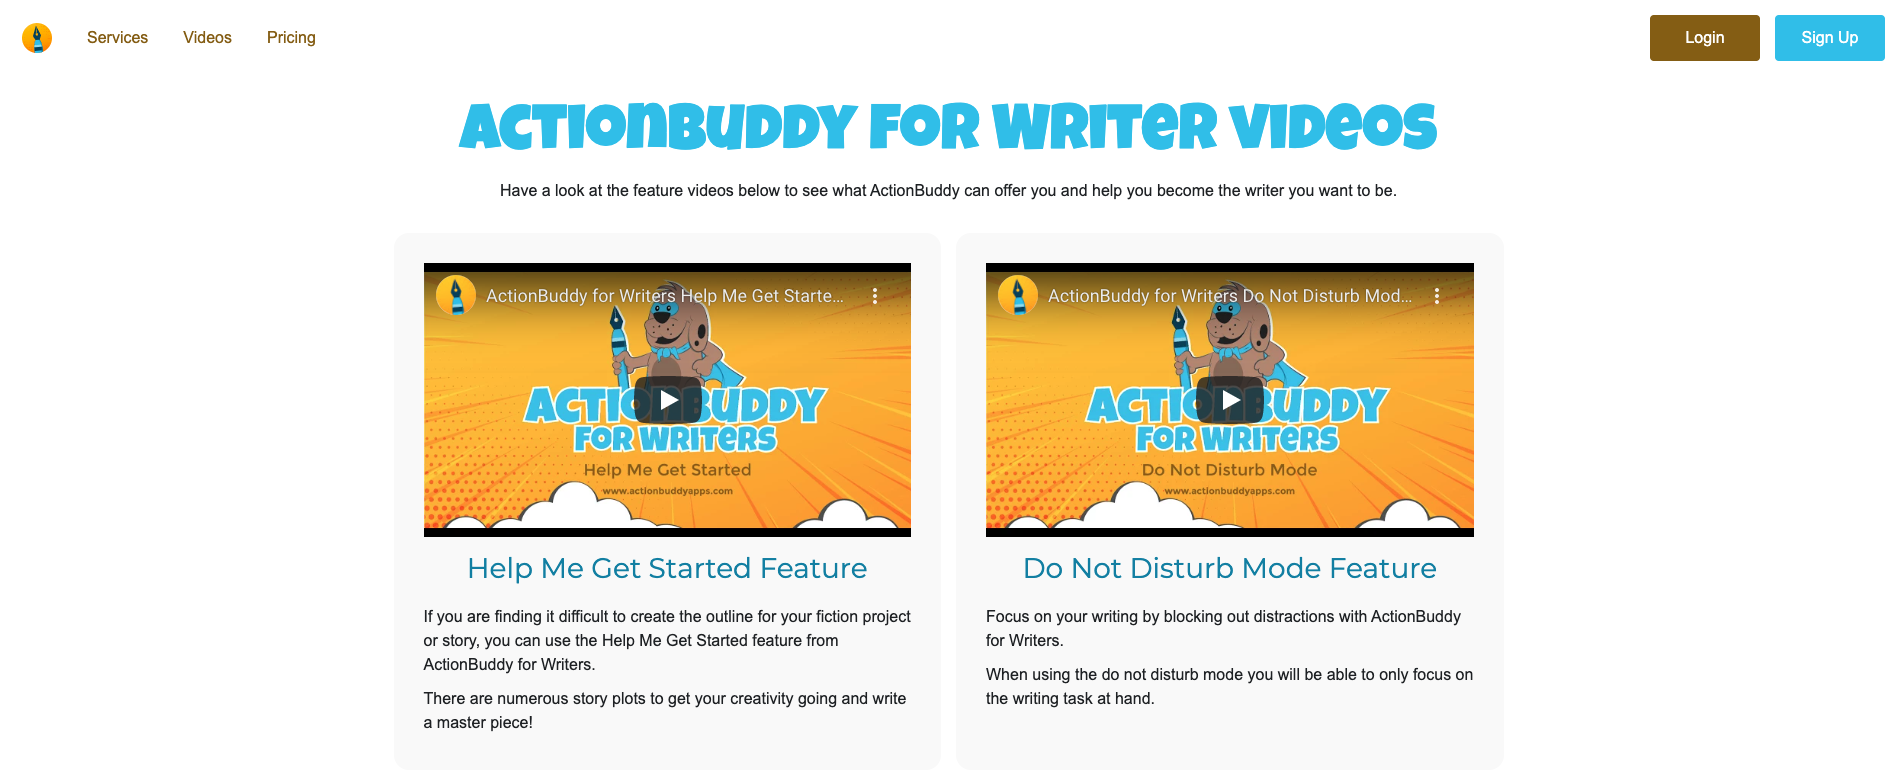 ActionBuddy for Writers Videos